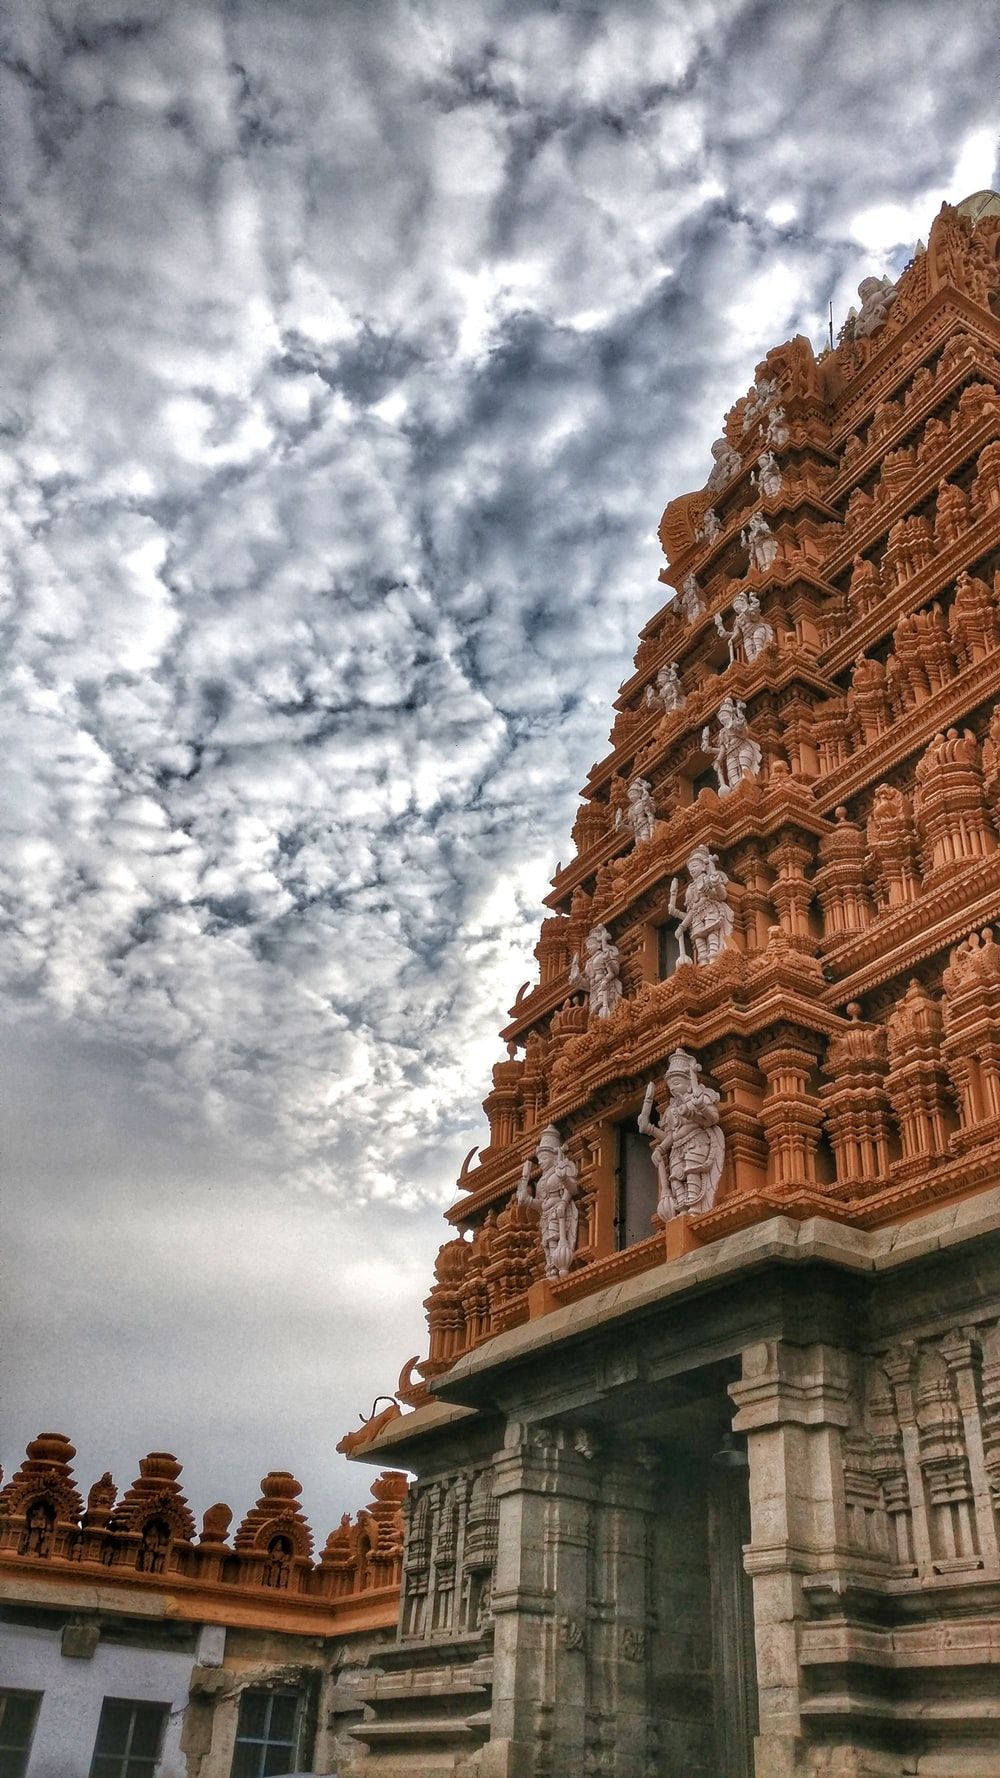 350+ Beautiful Tamil Nadu Pictures | Download Free Images on Unsplash